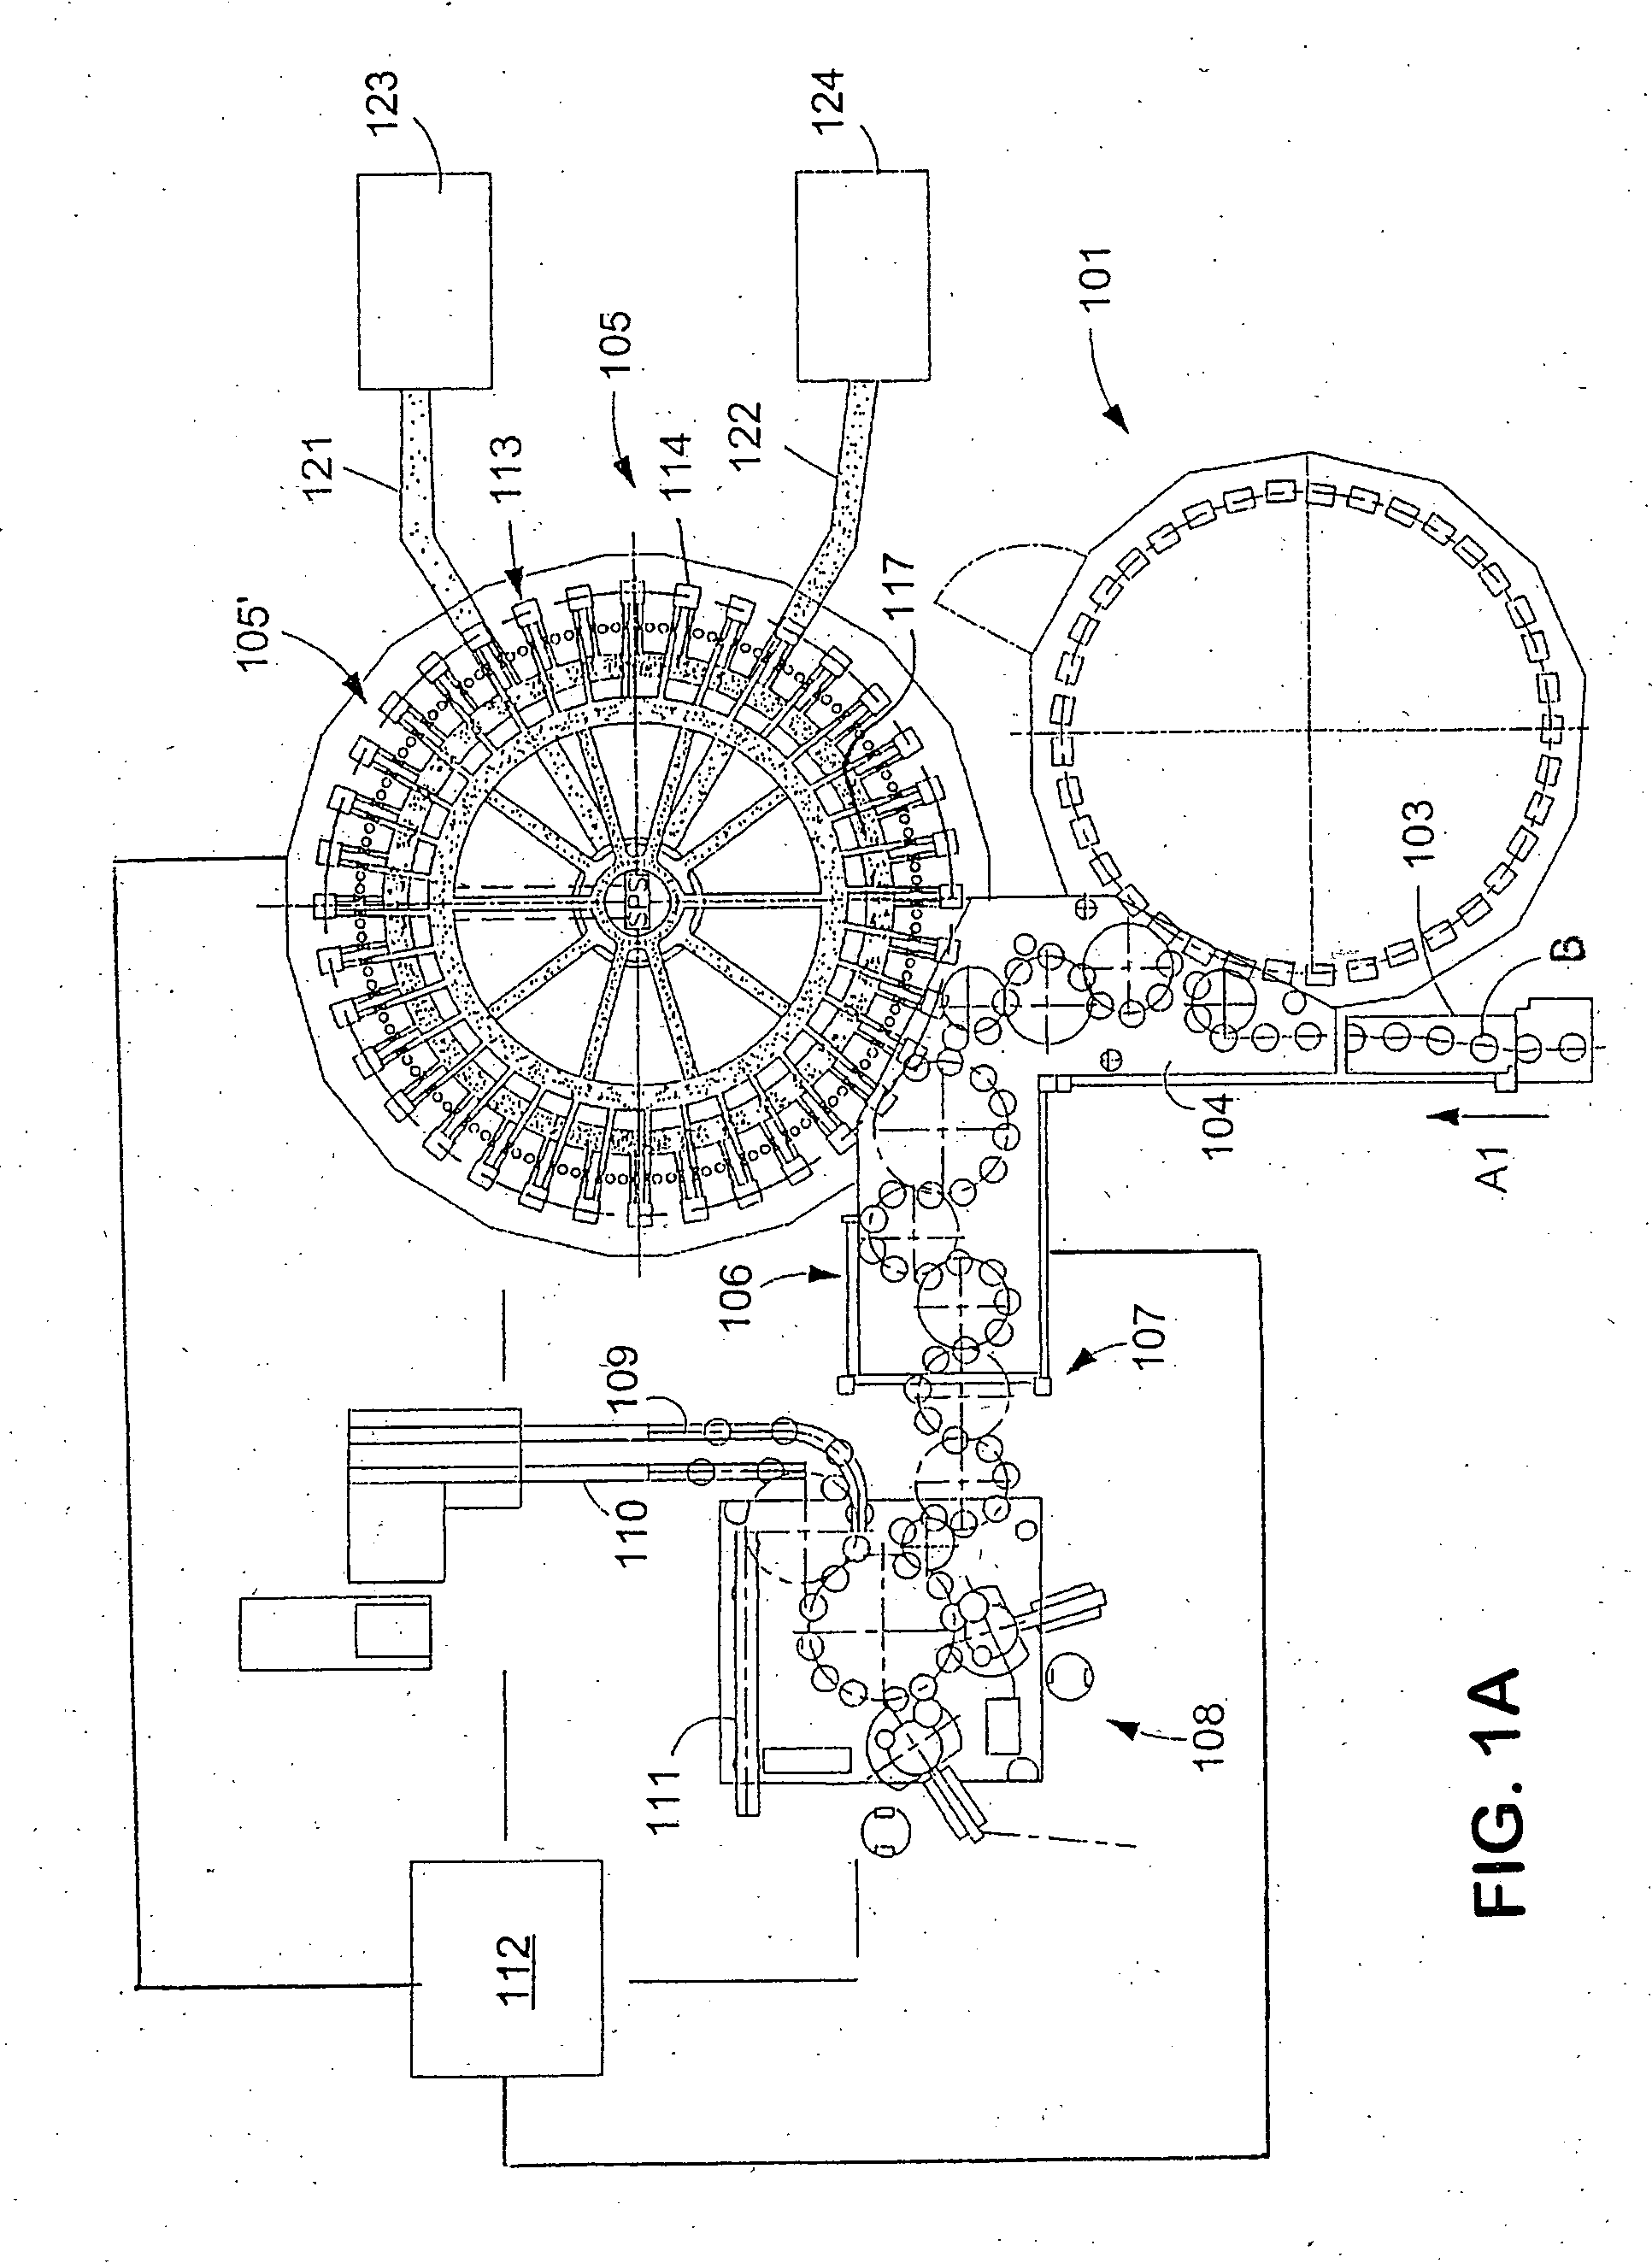 Beverage bottling plant for filling bottles with a liquid beverage material having a treatment device for the treatment of bottle caps